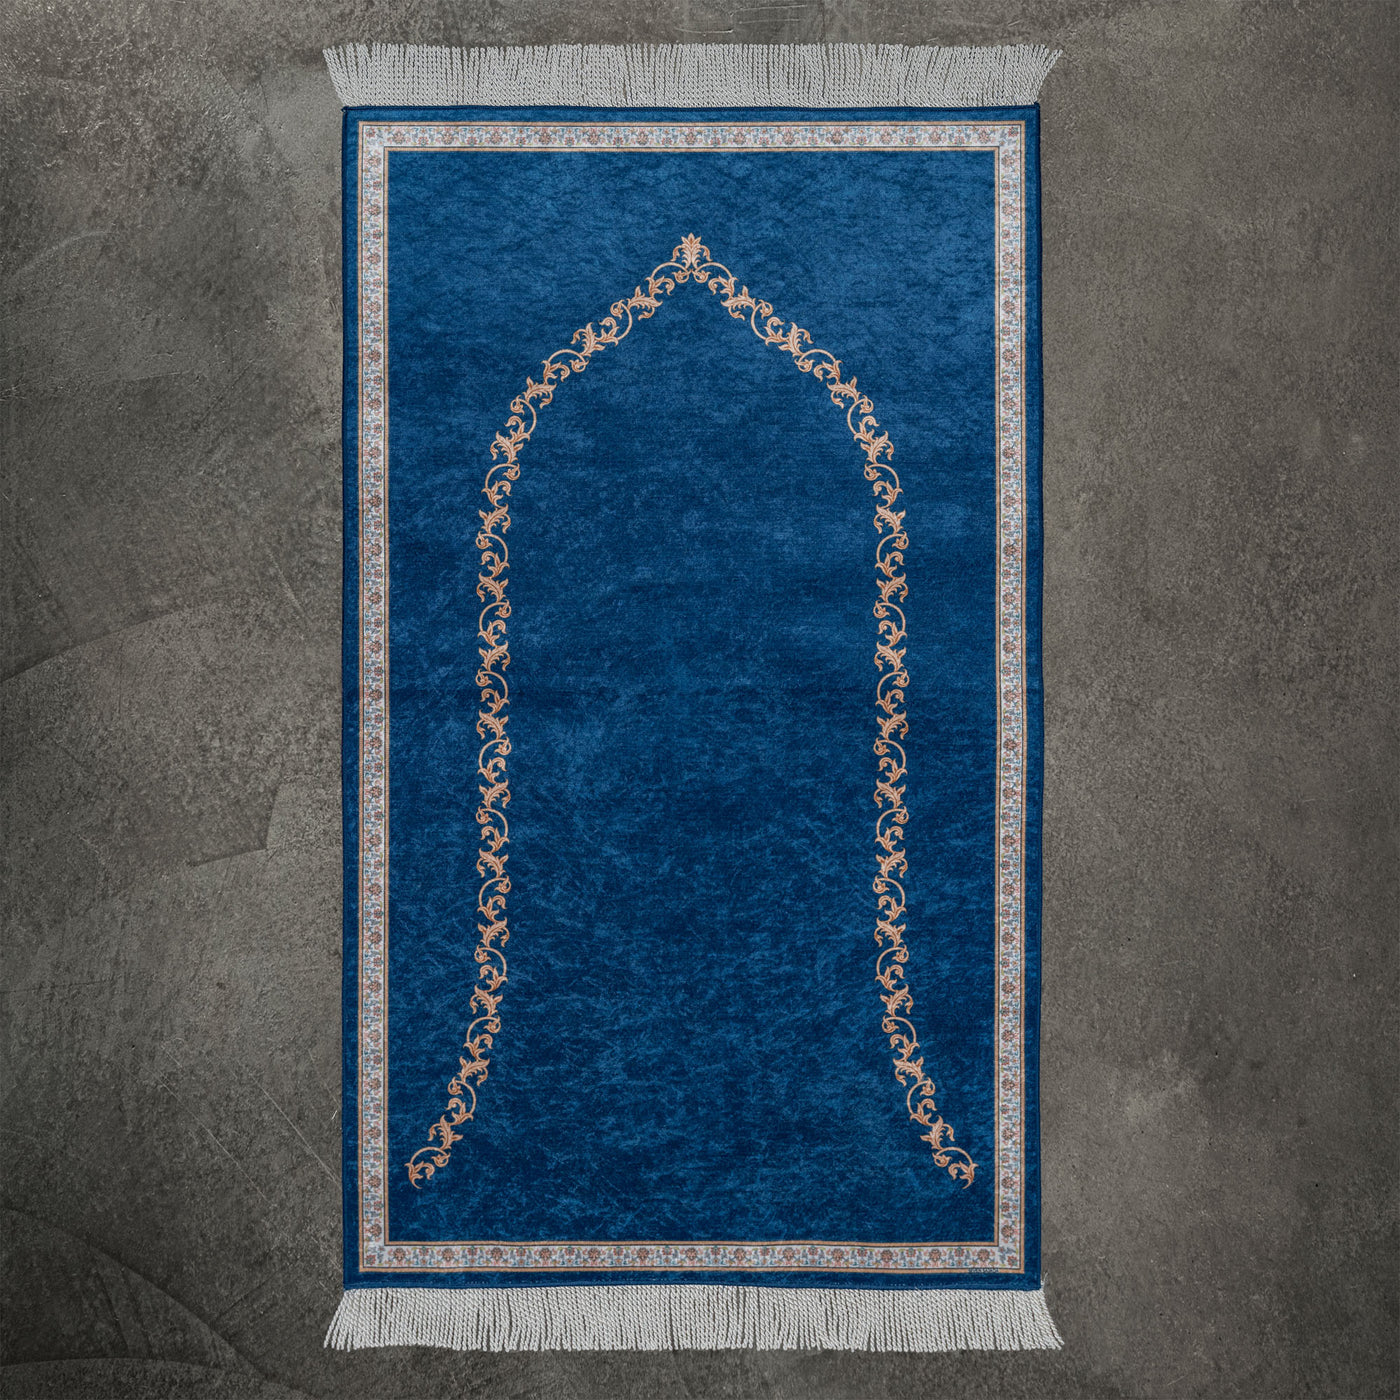 Premium Elegant Prayer Rug collection is a high-end quality Prayer Rug from Seven Sajada. The Premium Elegant Prayer Rug has very beautiful detailed pattern and is available in 4 different base colors.